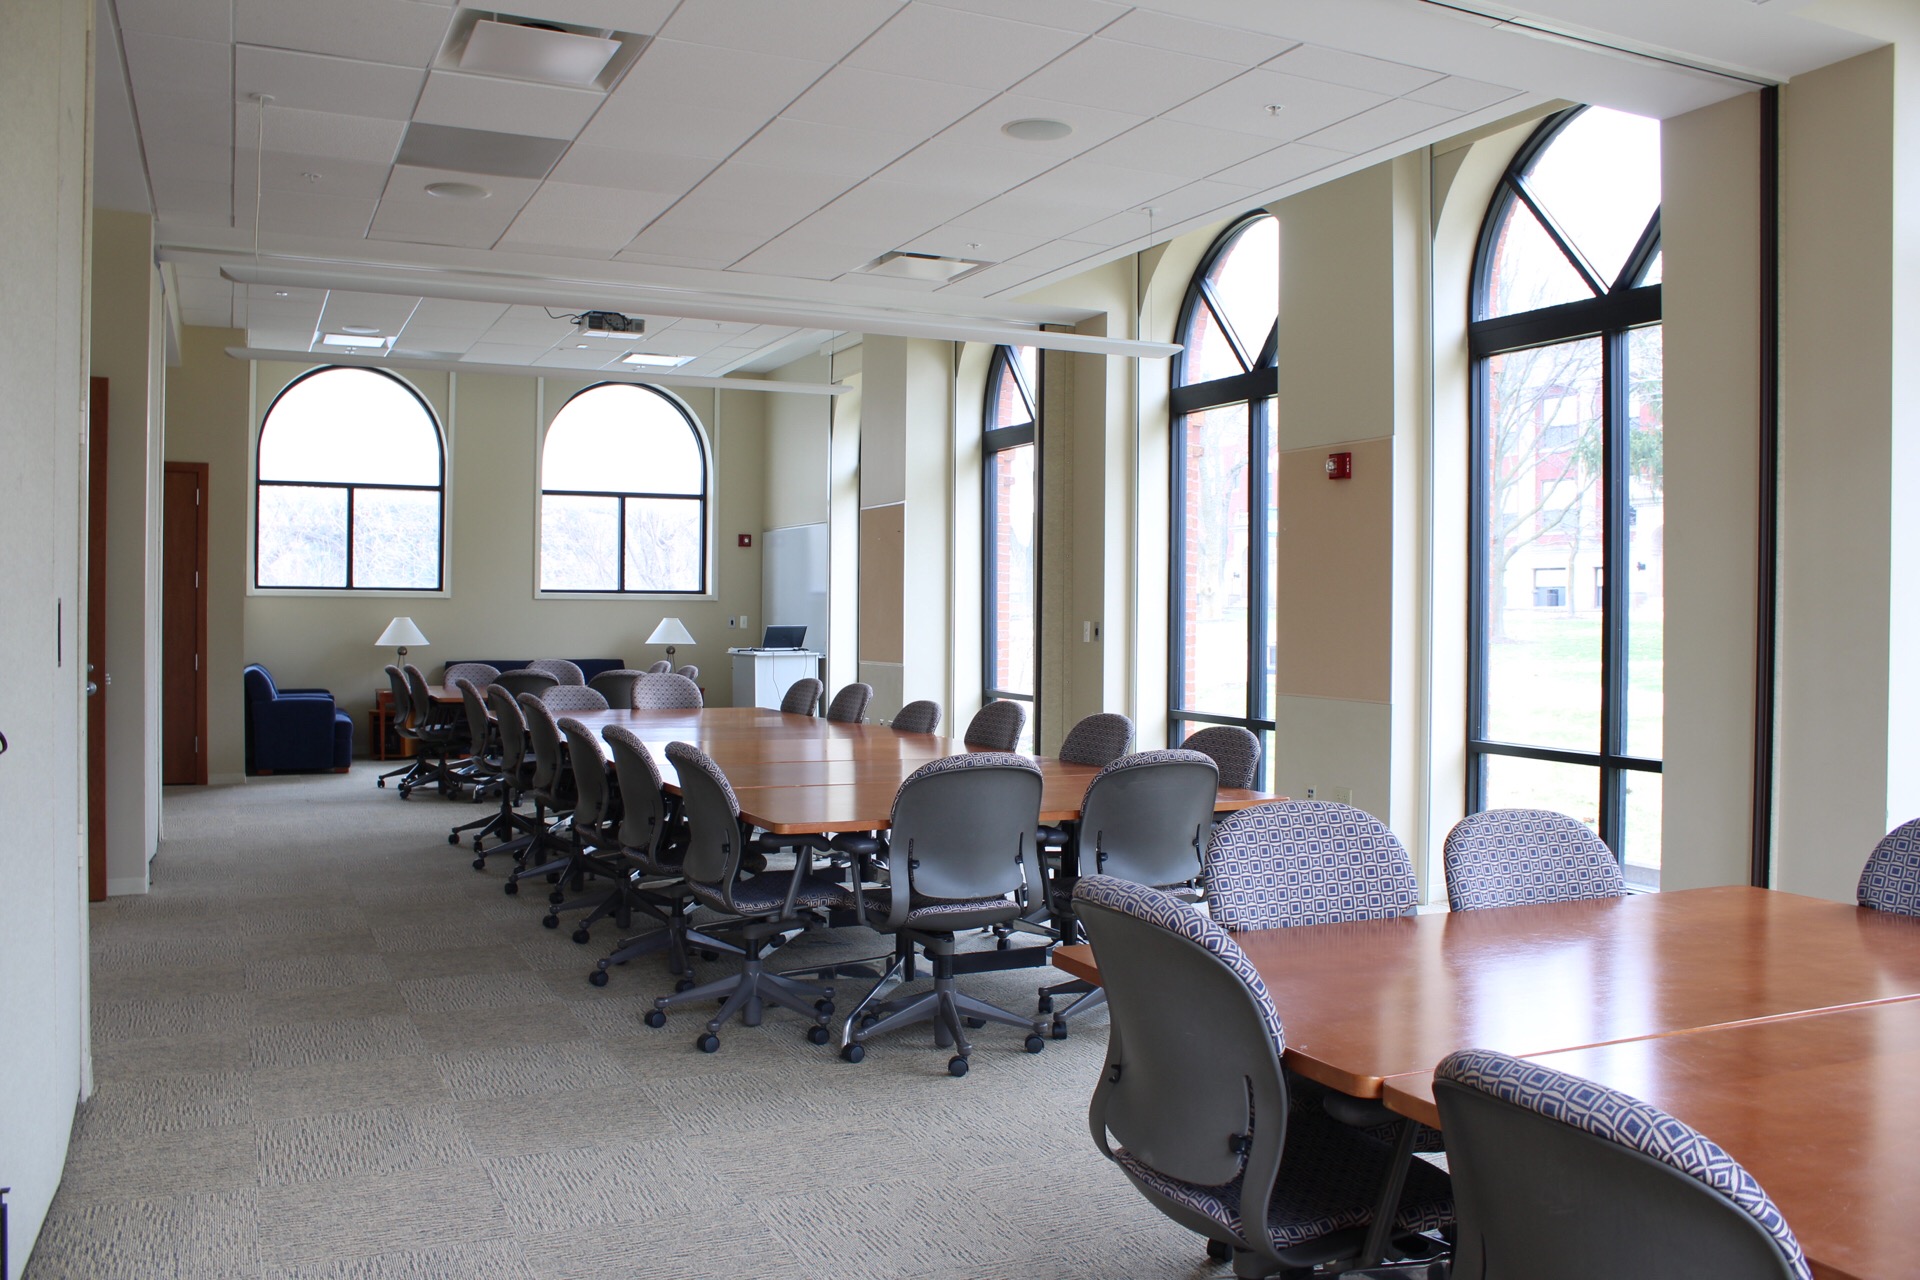 View from North to South ends of the CATS conference room.